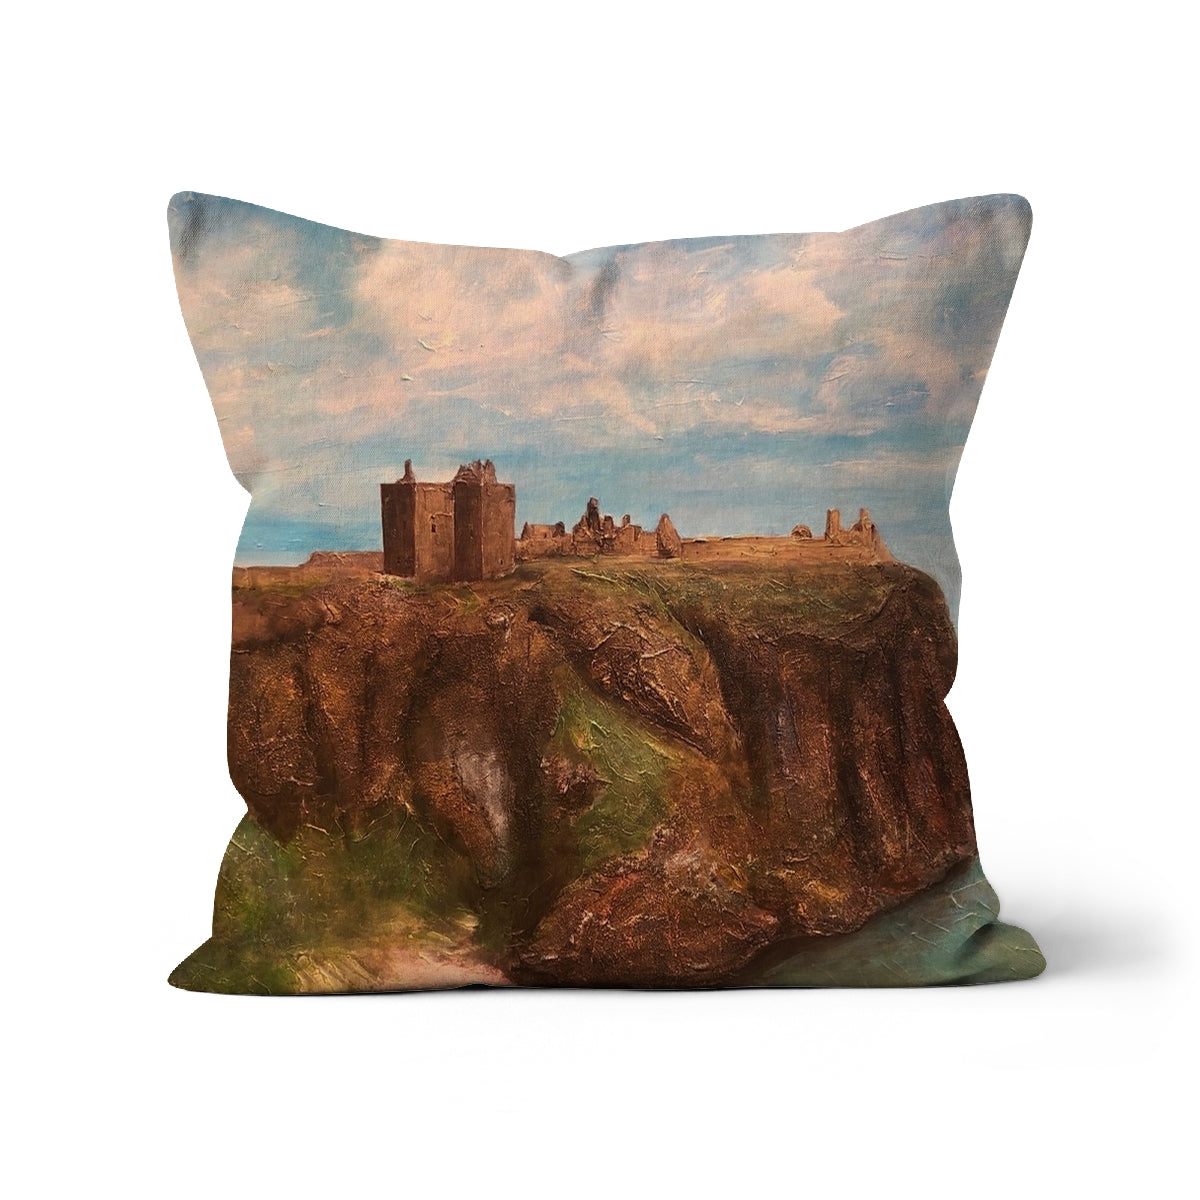 Dunnottar Castle Art Gifts Cushion-Homeware-Prodigi-Faux Suede-22"x22"-Paintings, Prints, Homeware, Art Gifts From Scotland By Scottish Artist Kevin Hunter